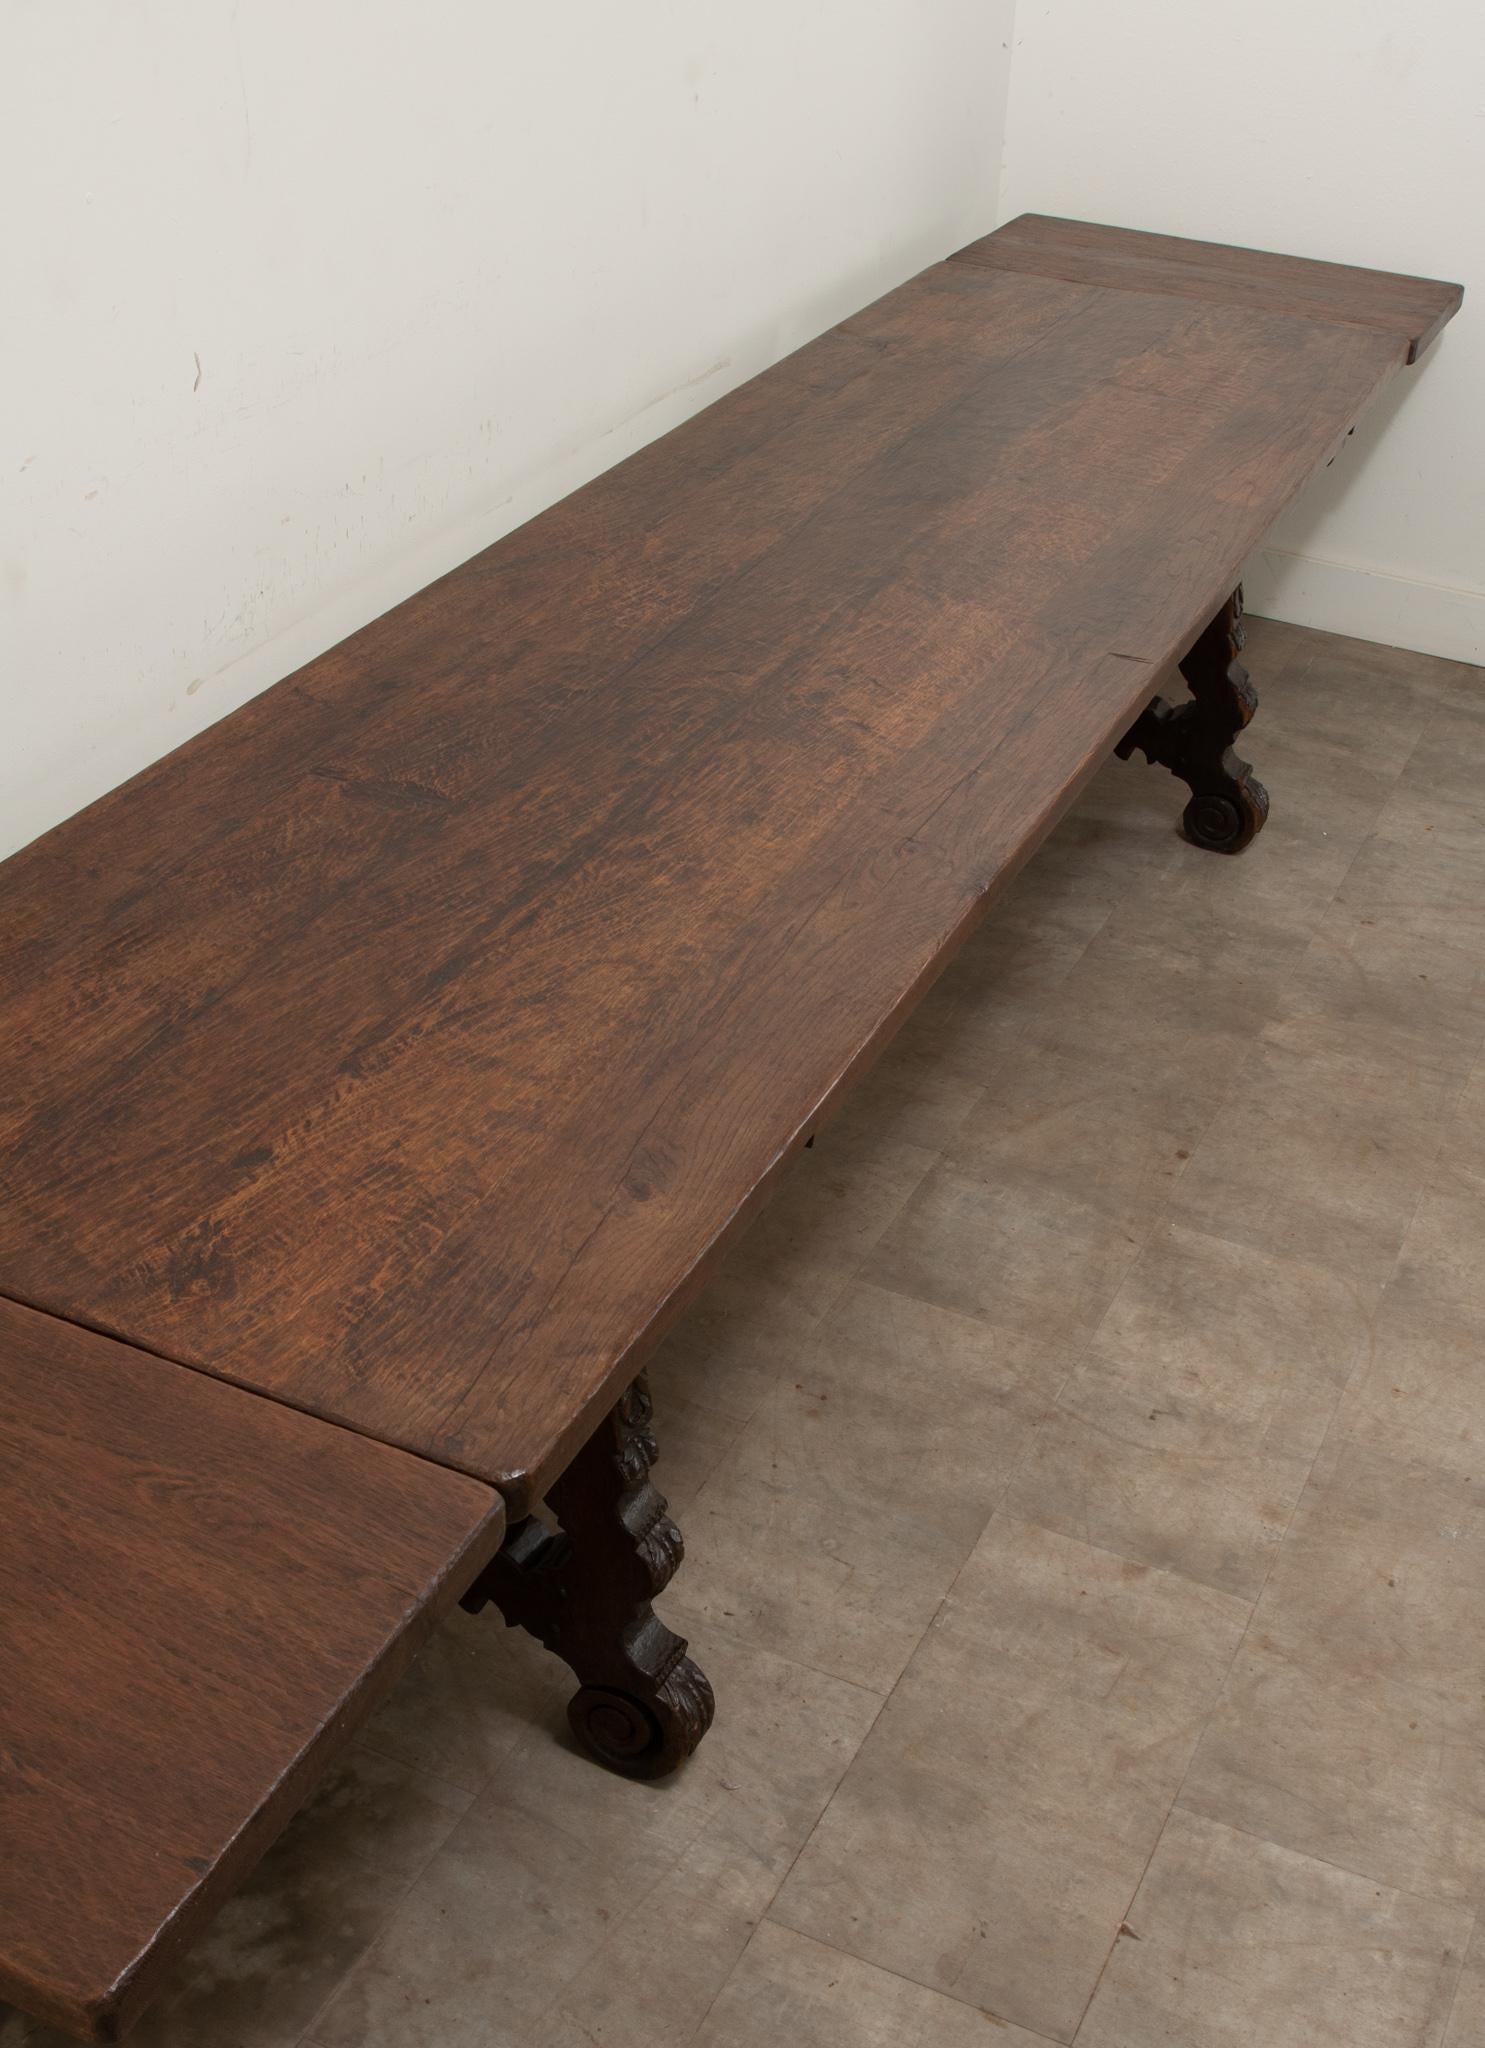 Spanish Oak Extending Dining Table In Good Condition For Sale In Baton Rouge, LA